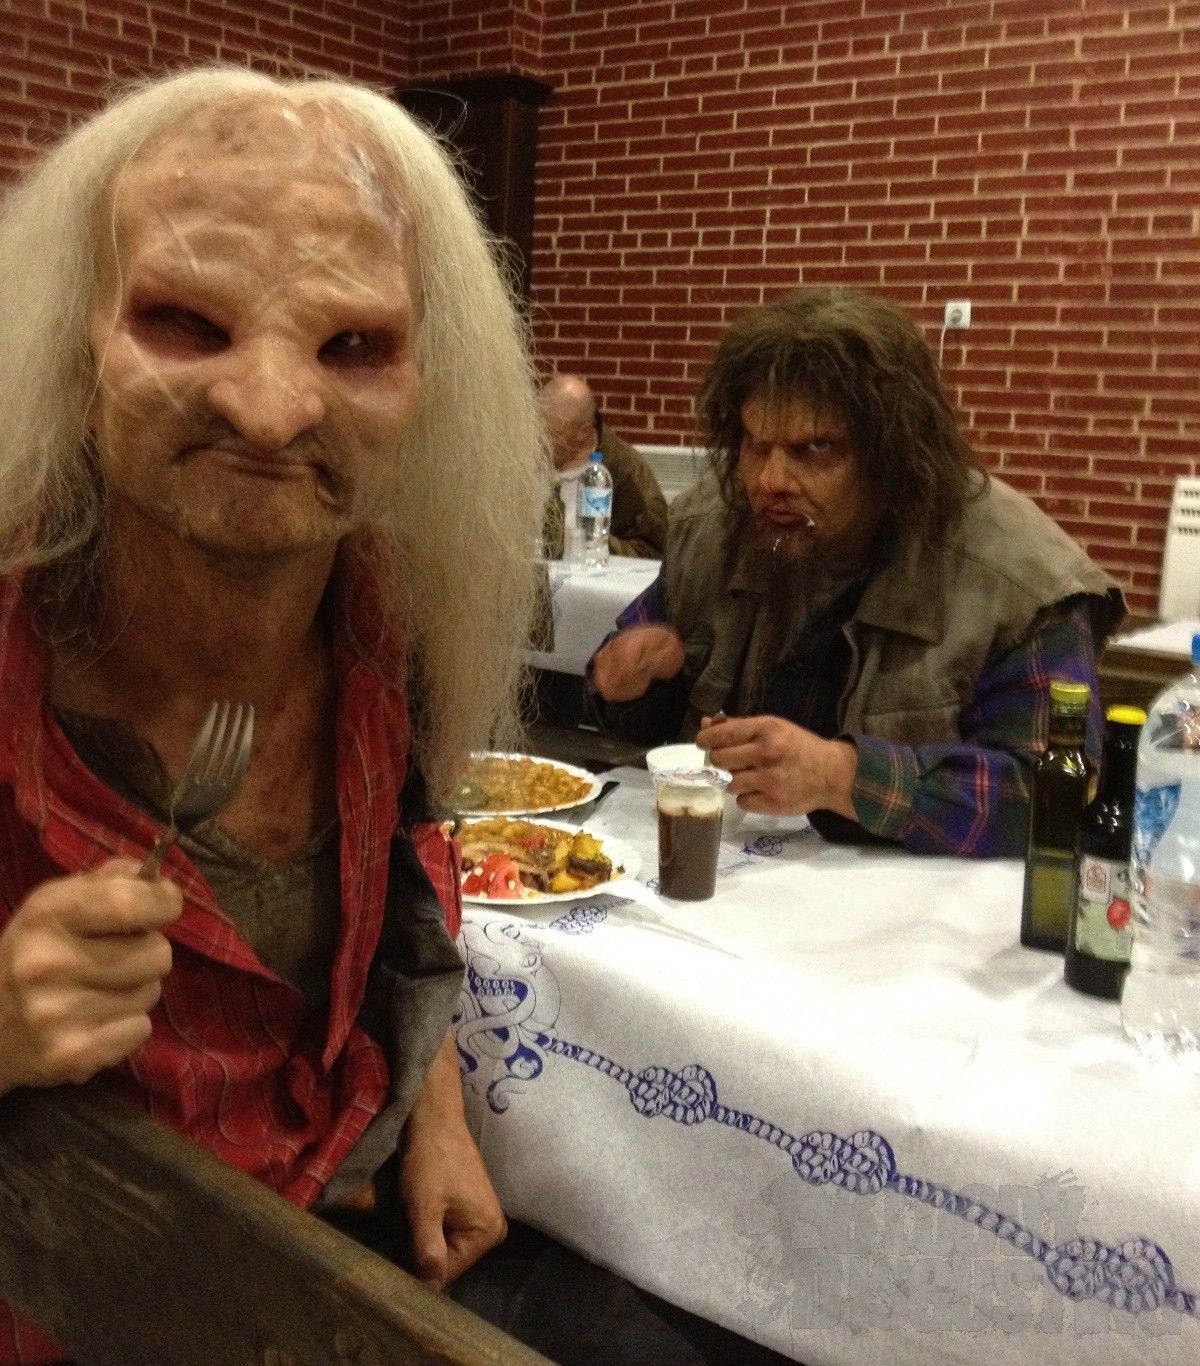 Bulgarian Dinner Wrong Turn Fans Share Images